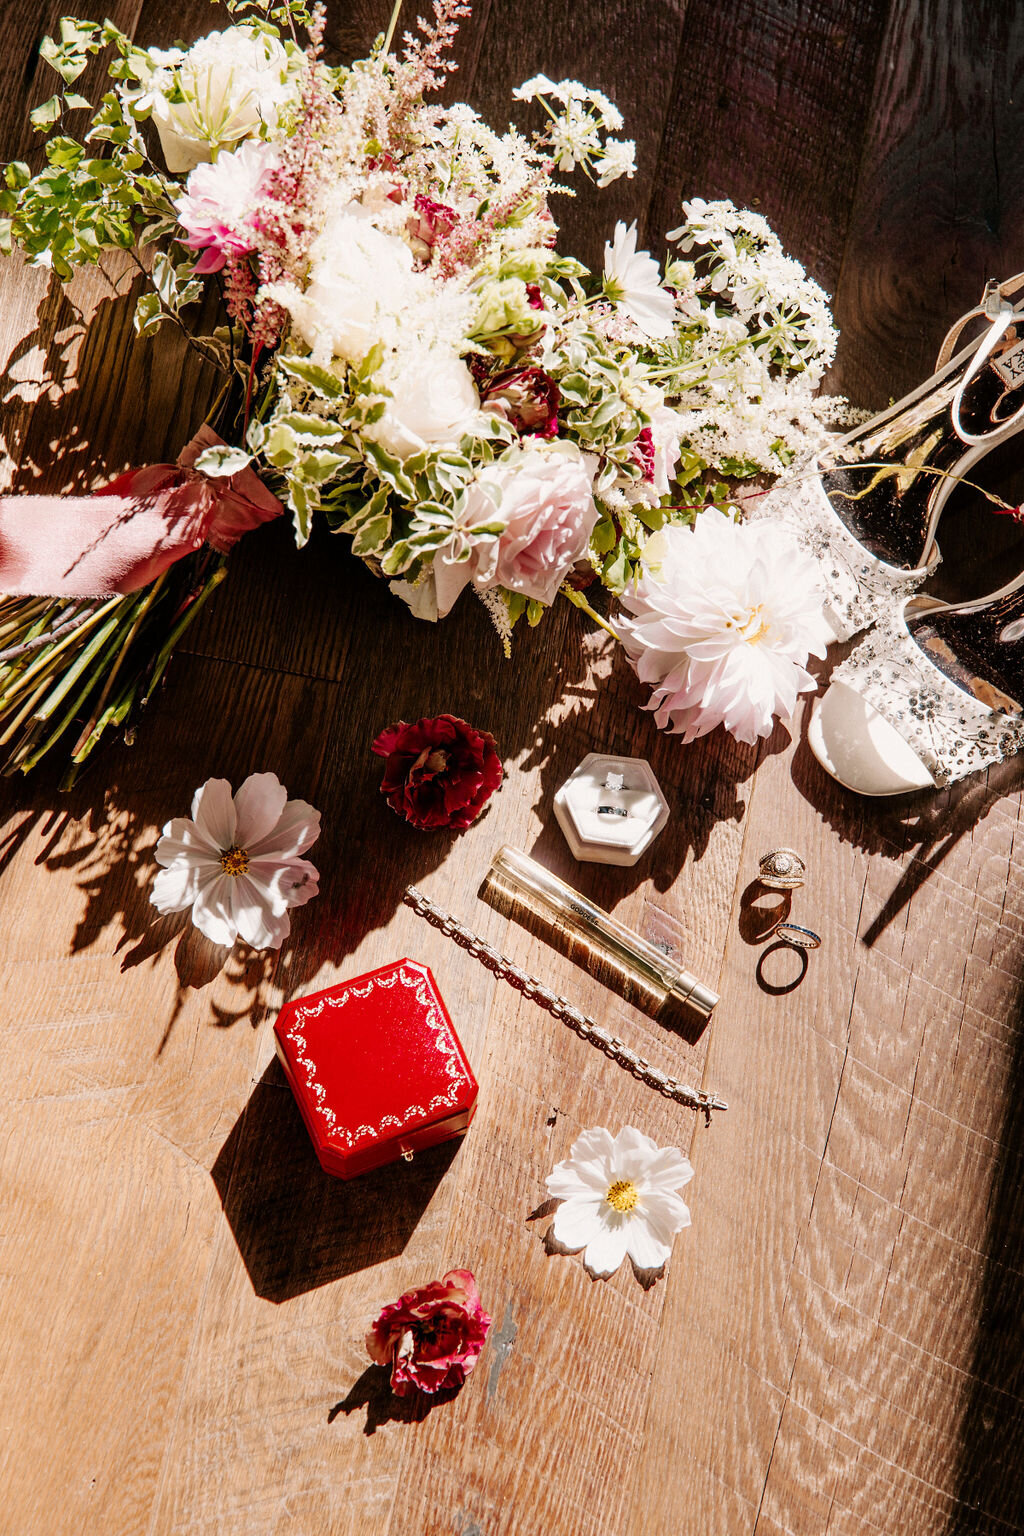 A bridal bouquet with shoes, rings, and perfume.